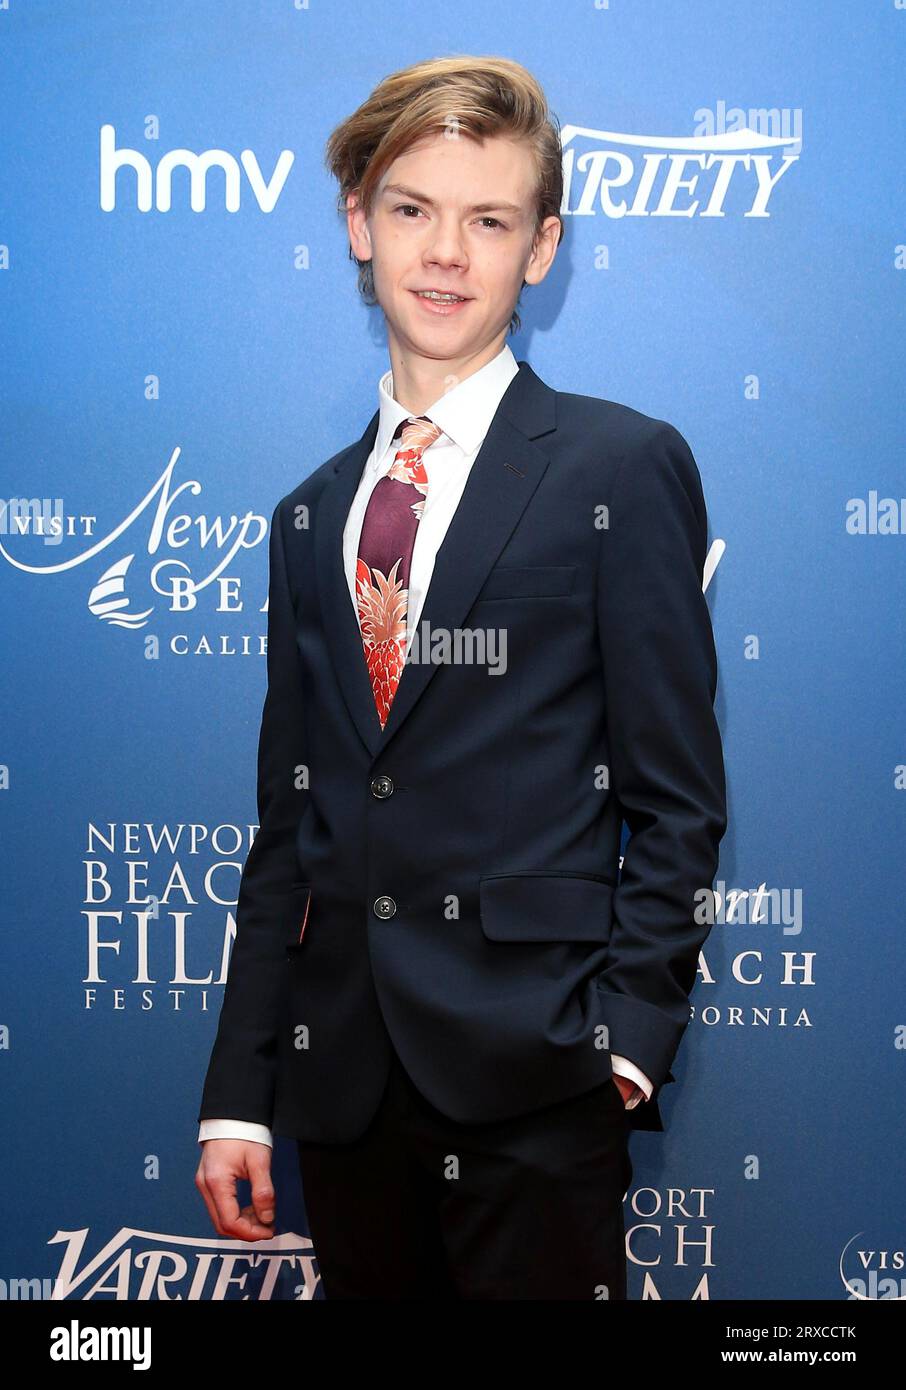 Thomas Brodie-Sangster attends the 'Newport Beach Film Festival' at The Rosewood Hotel in London. Stock Photo